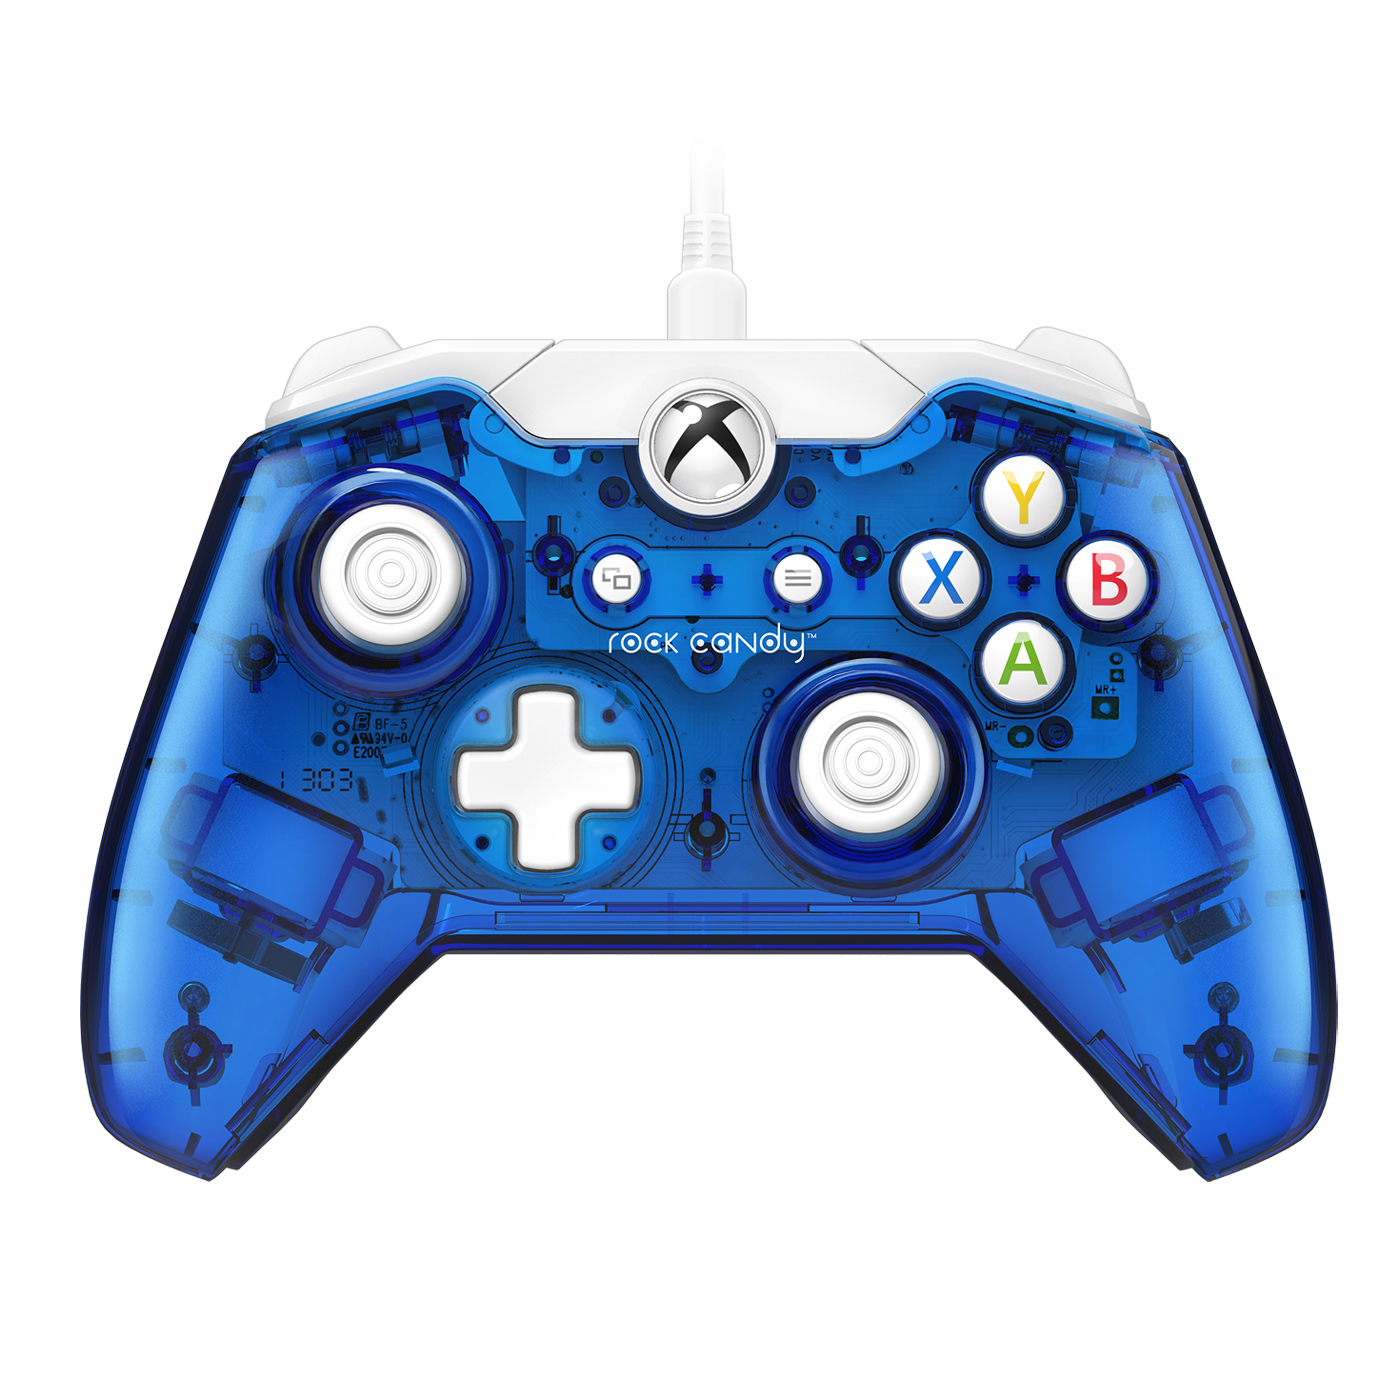 Rock Candy Ps3 Controller Driver For Windows 10